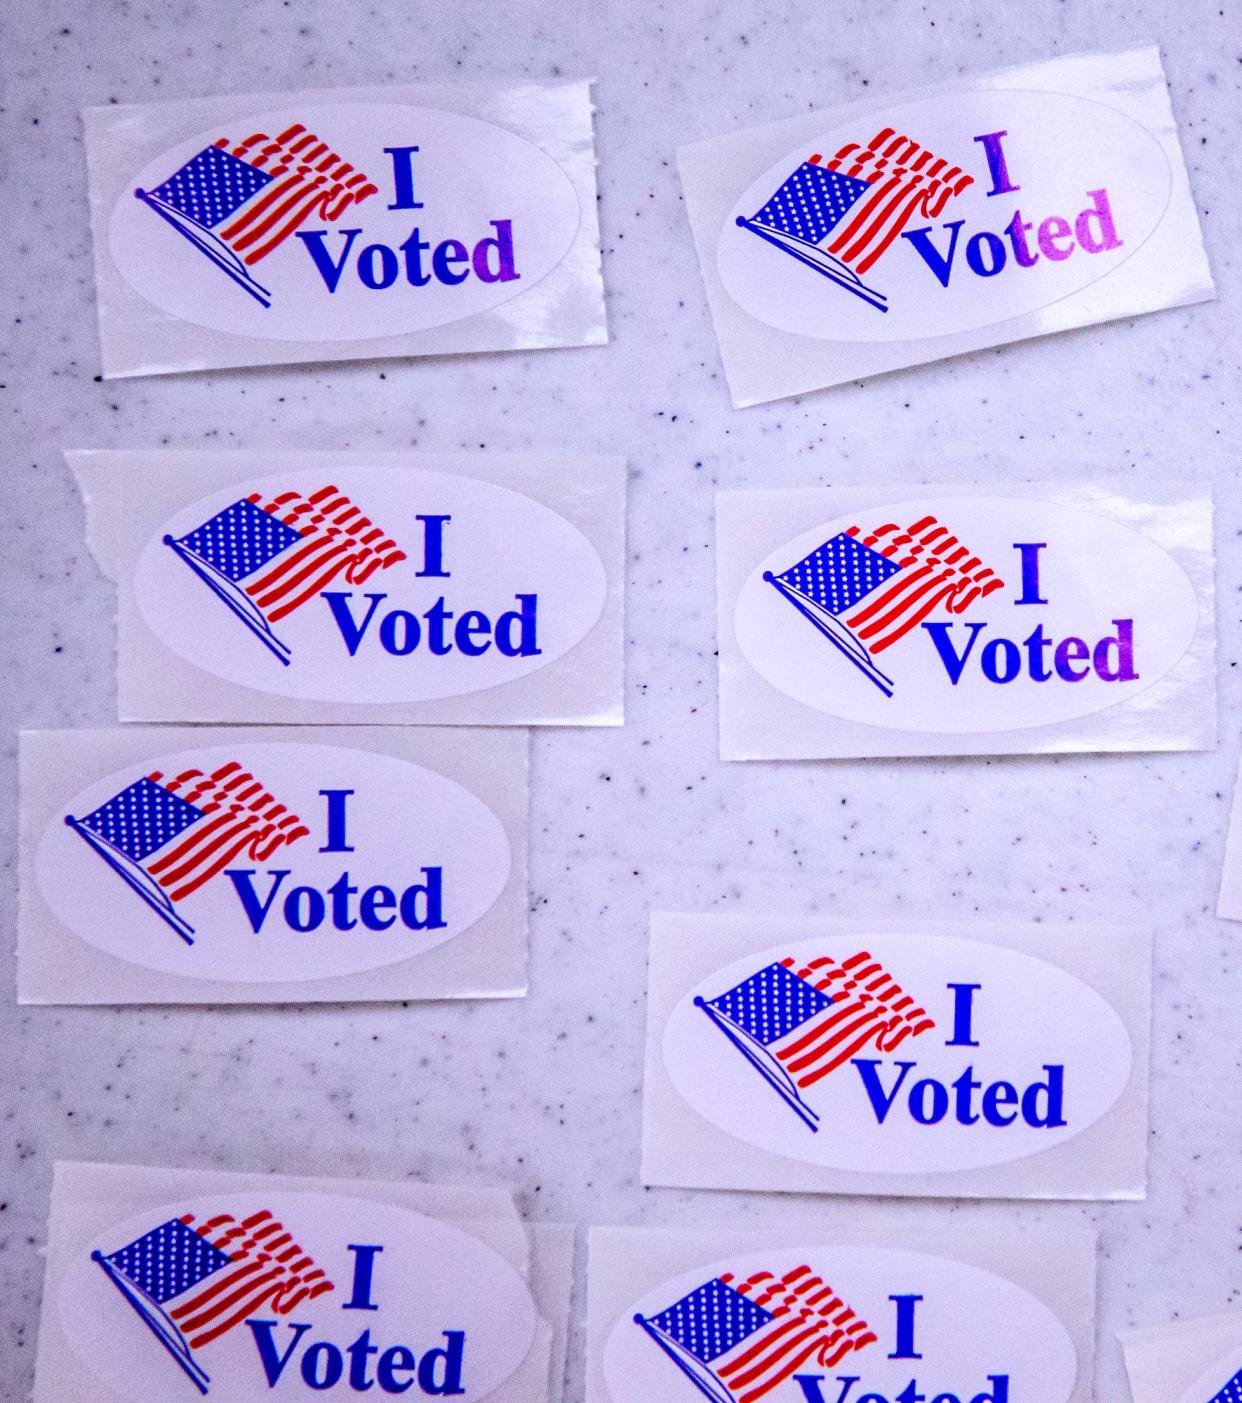 Voting stickers lie on a table during an earlier election this year at Northwest Baptist Church in Oklahoma City.